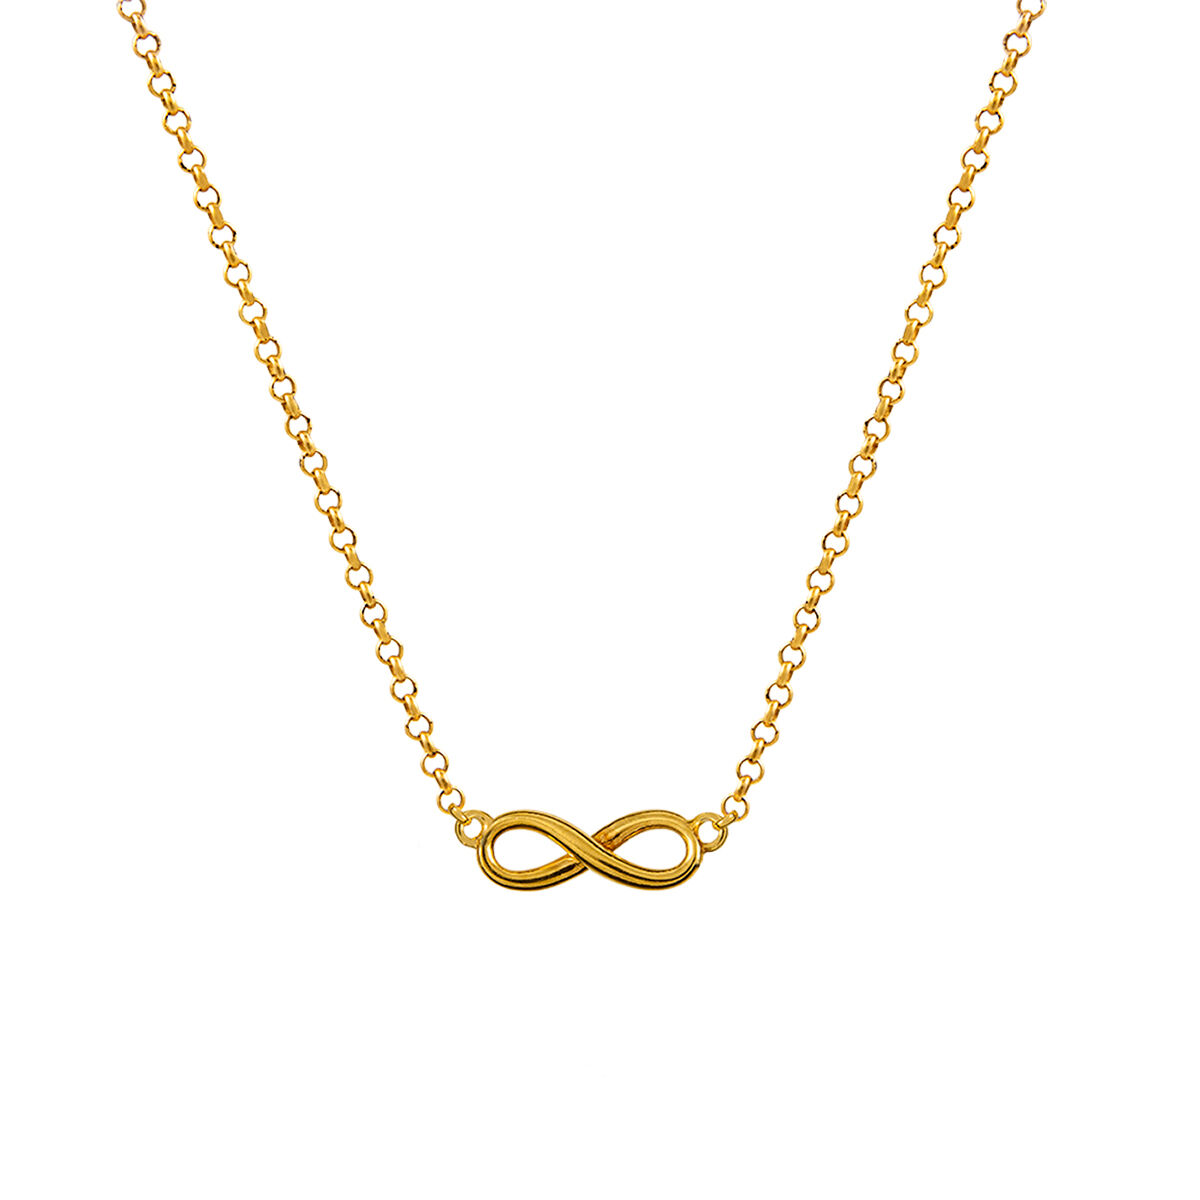 Infinity pendant in 18k yellow gold-plated silver, J01248-02, hi-res